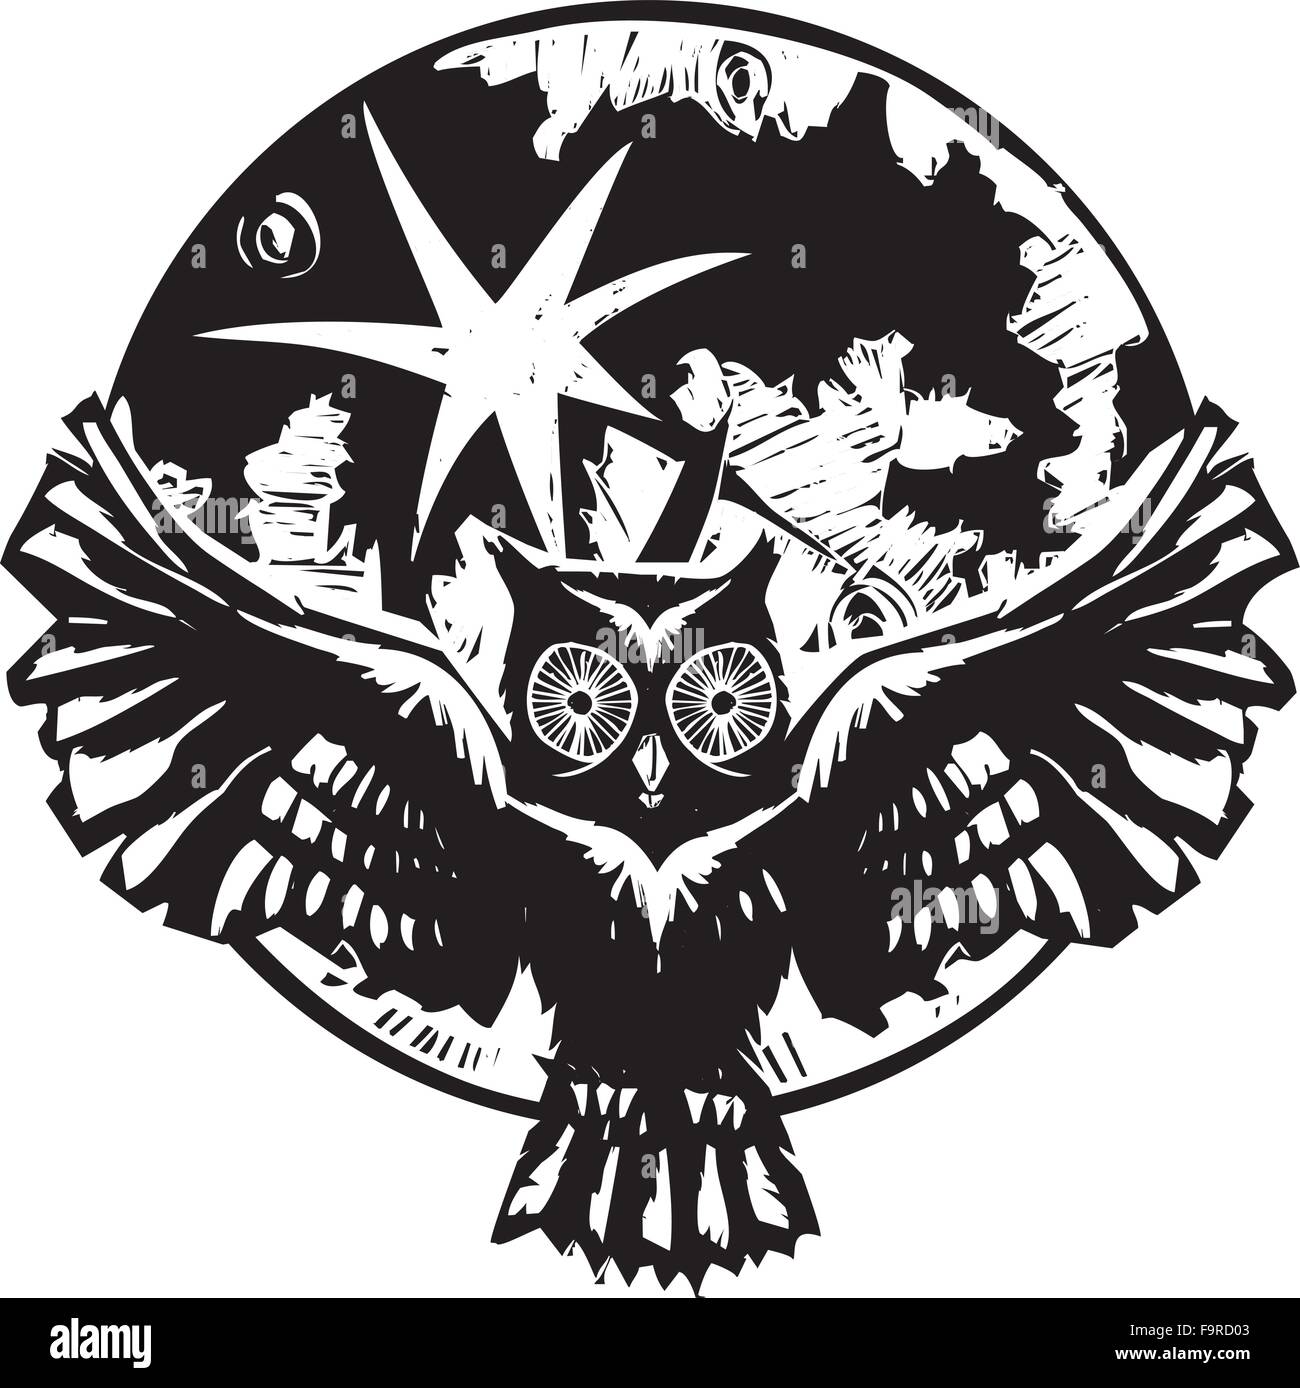 Woodcut flying owl with feathered wings spread in front of a full moon. Stock Vector